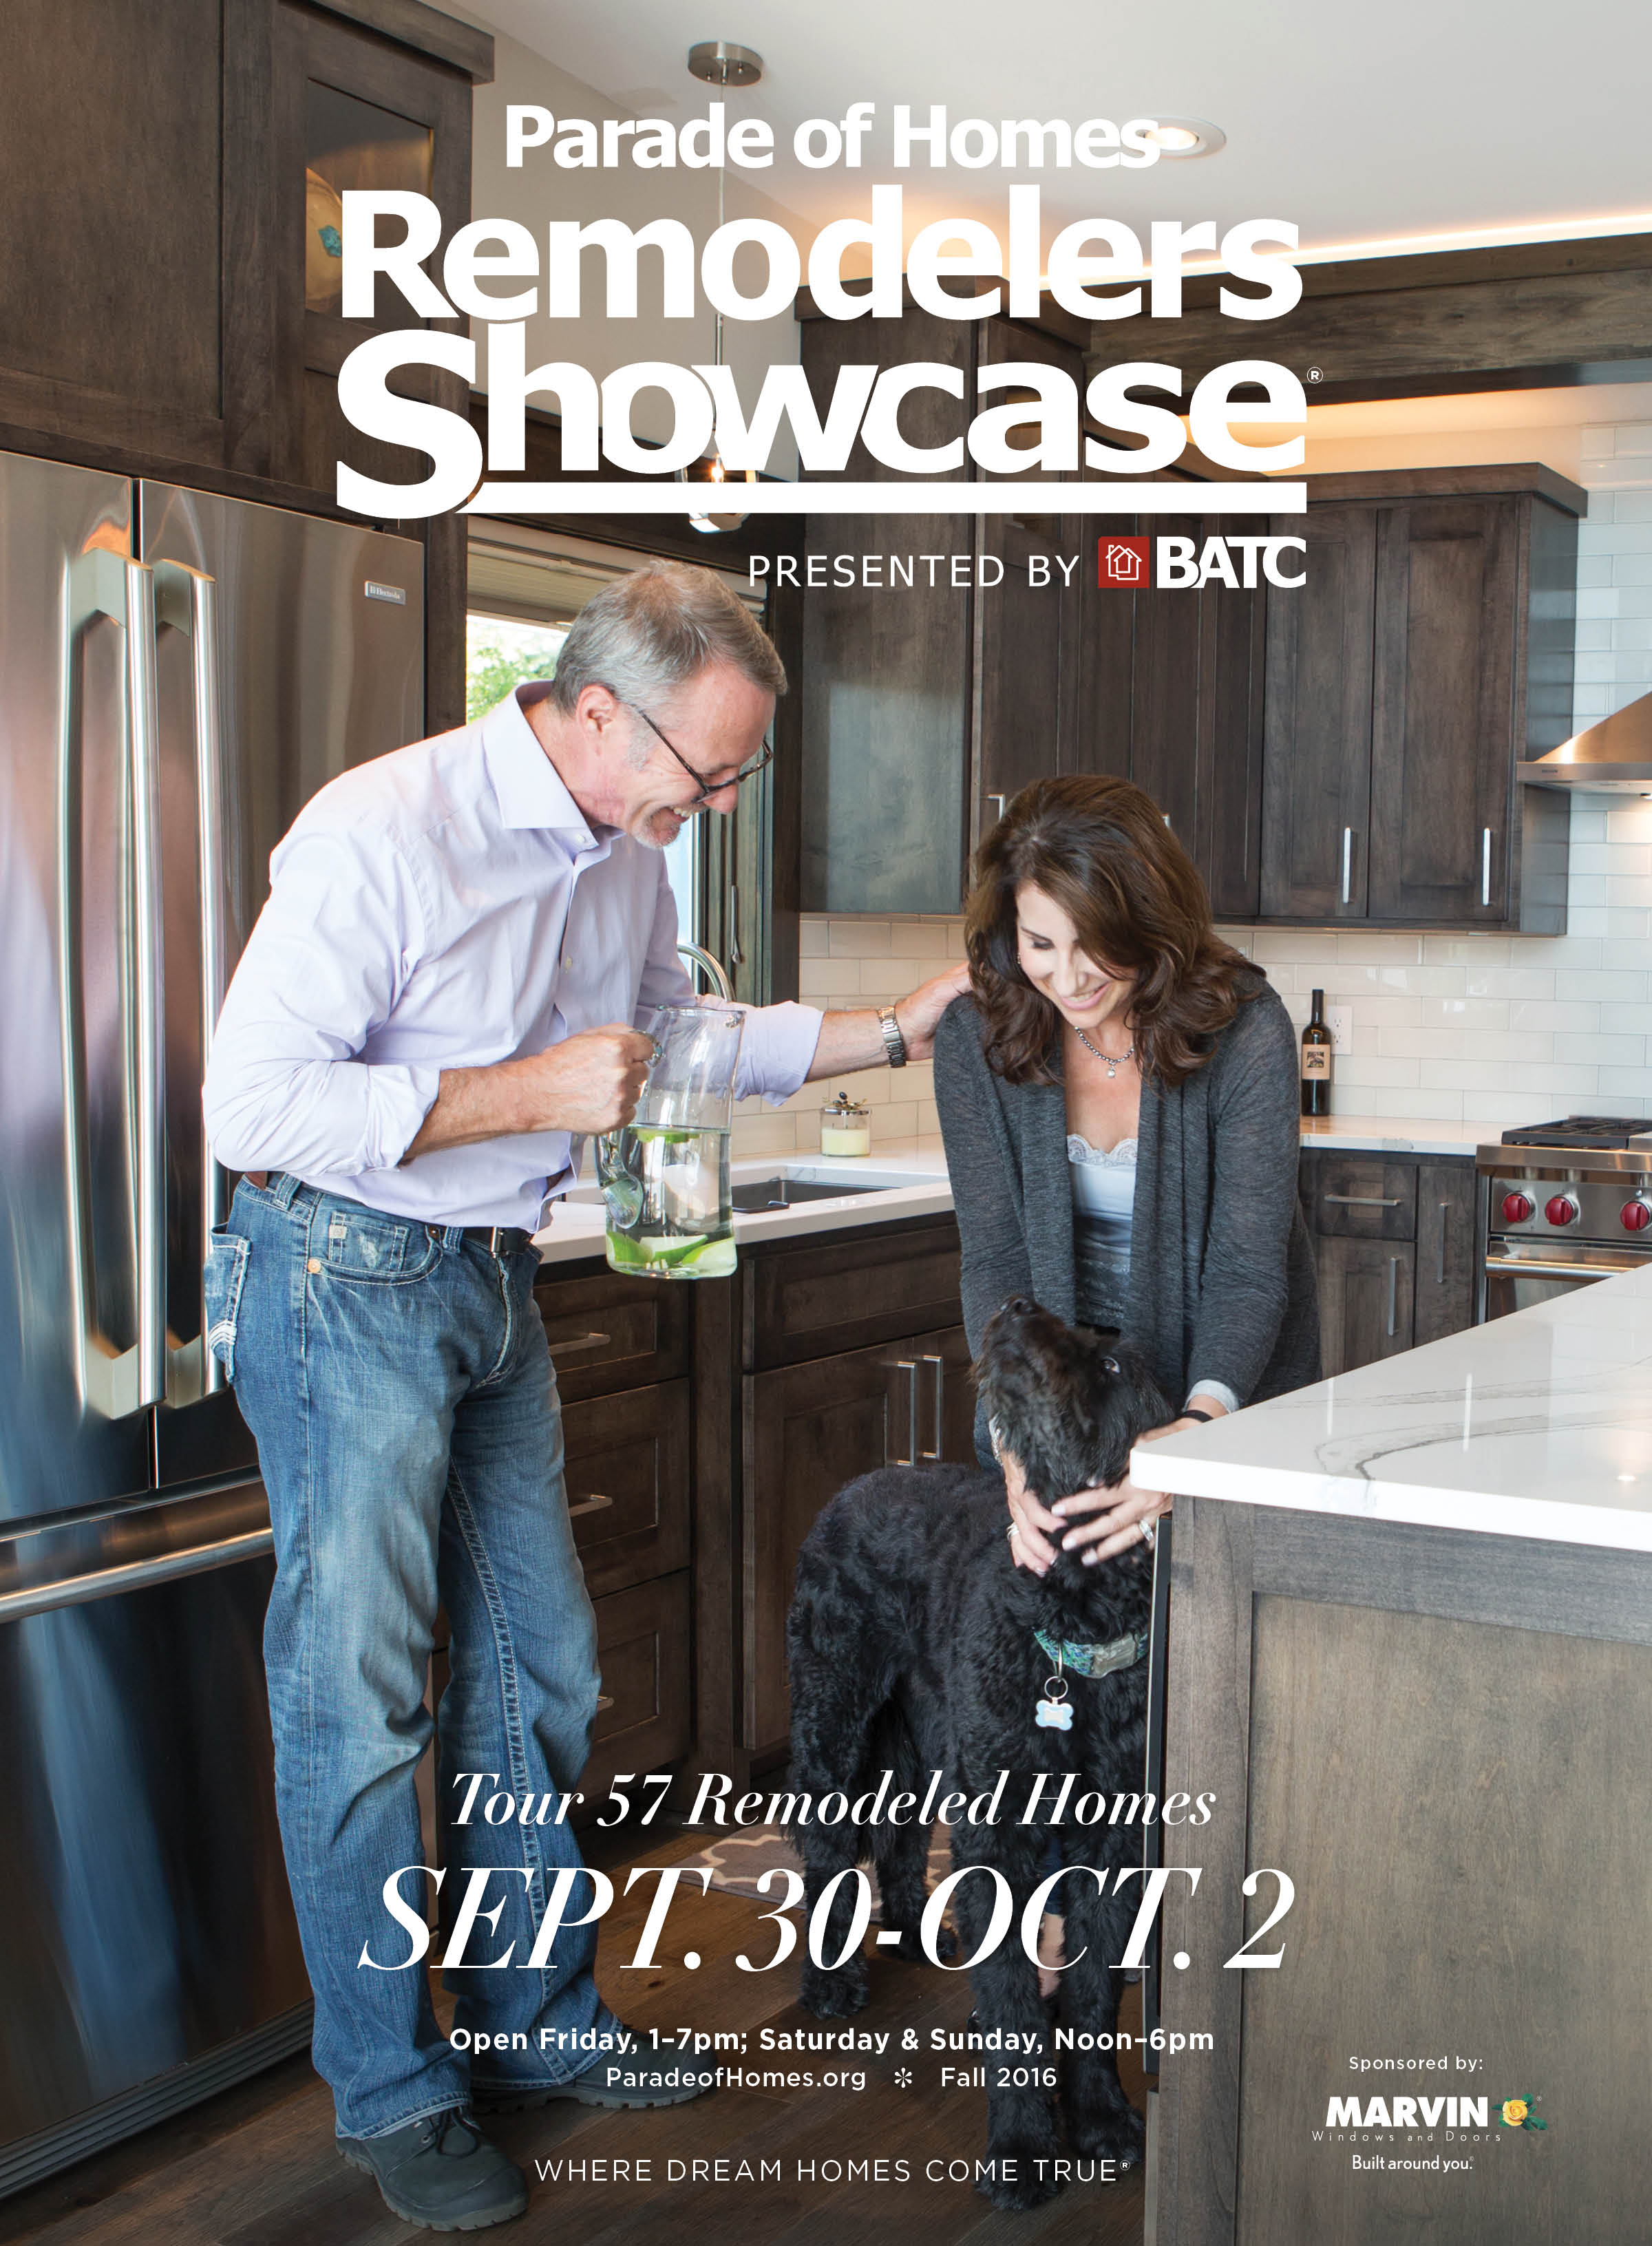 Image for Fall Parade of Homes Remodelers Showcase® Opens Nearly 60 Remodeled Homes to Tour September 30 – October 2, 2016